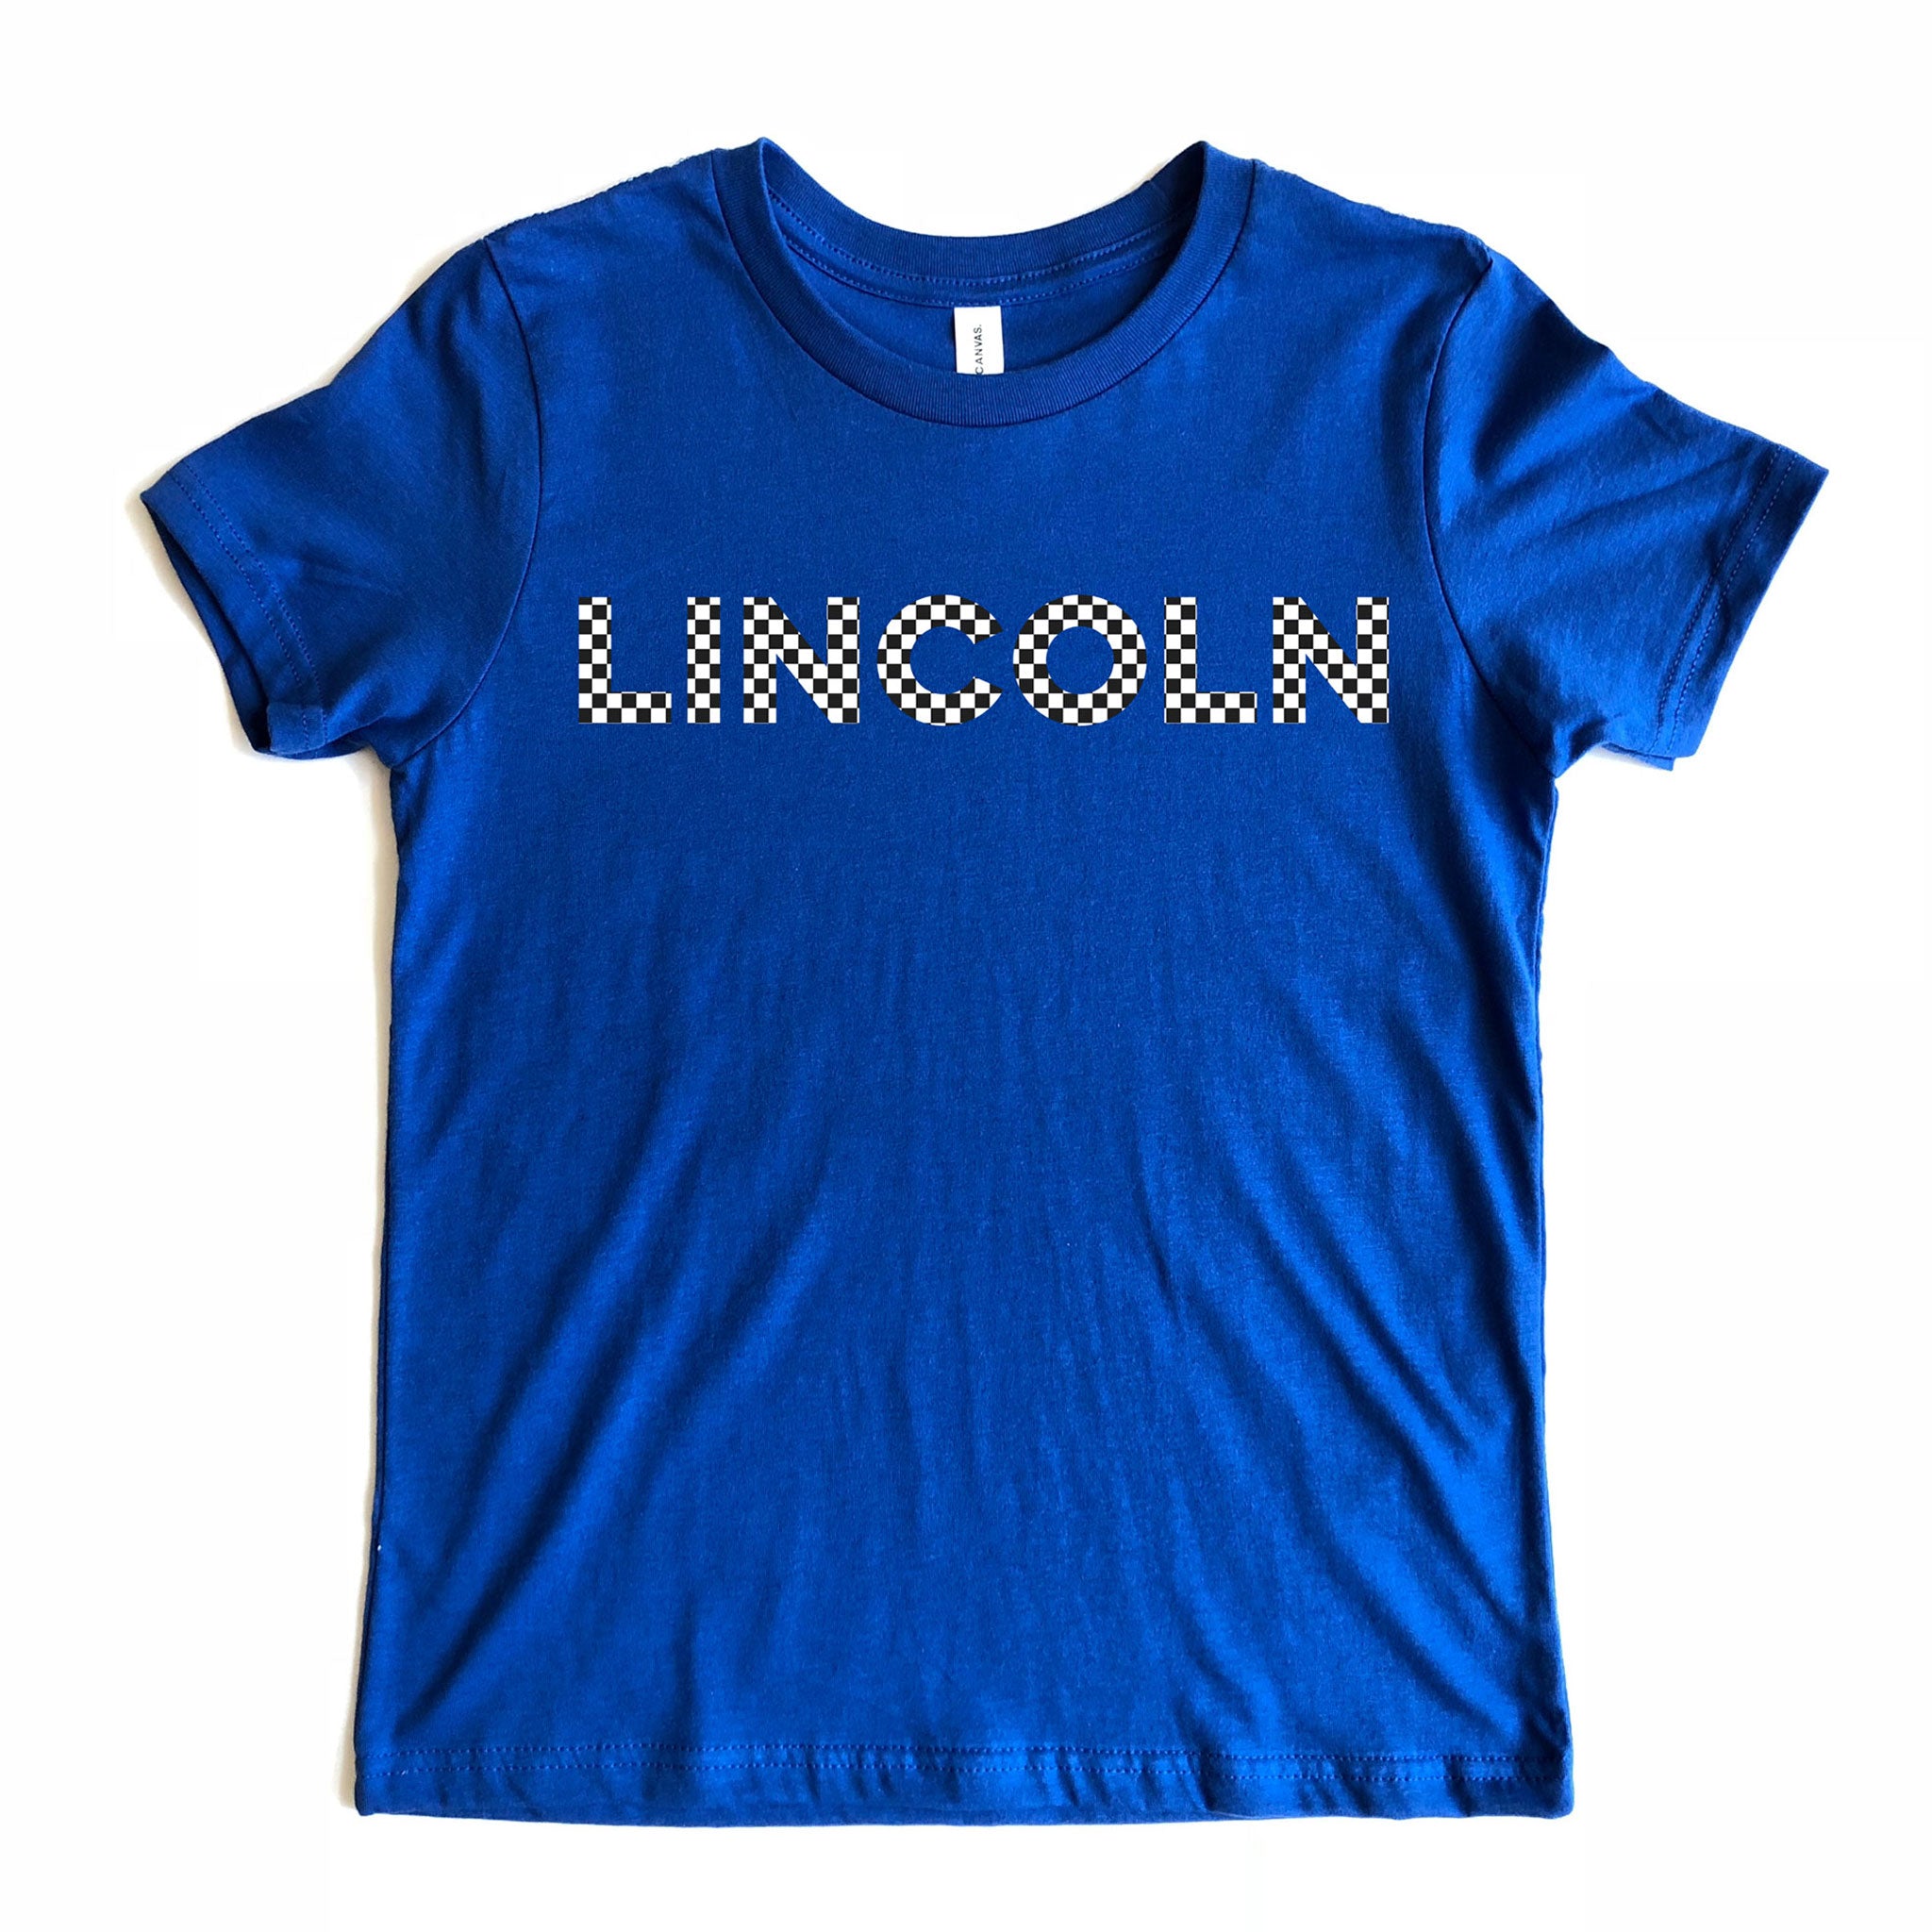 Lincoln Adult Checkered Royal Blue Tee